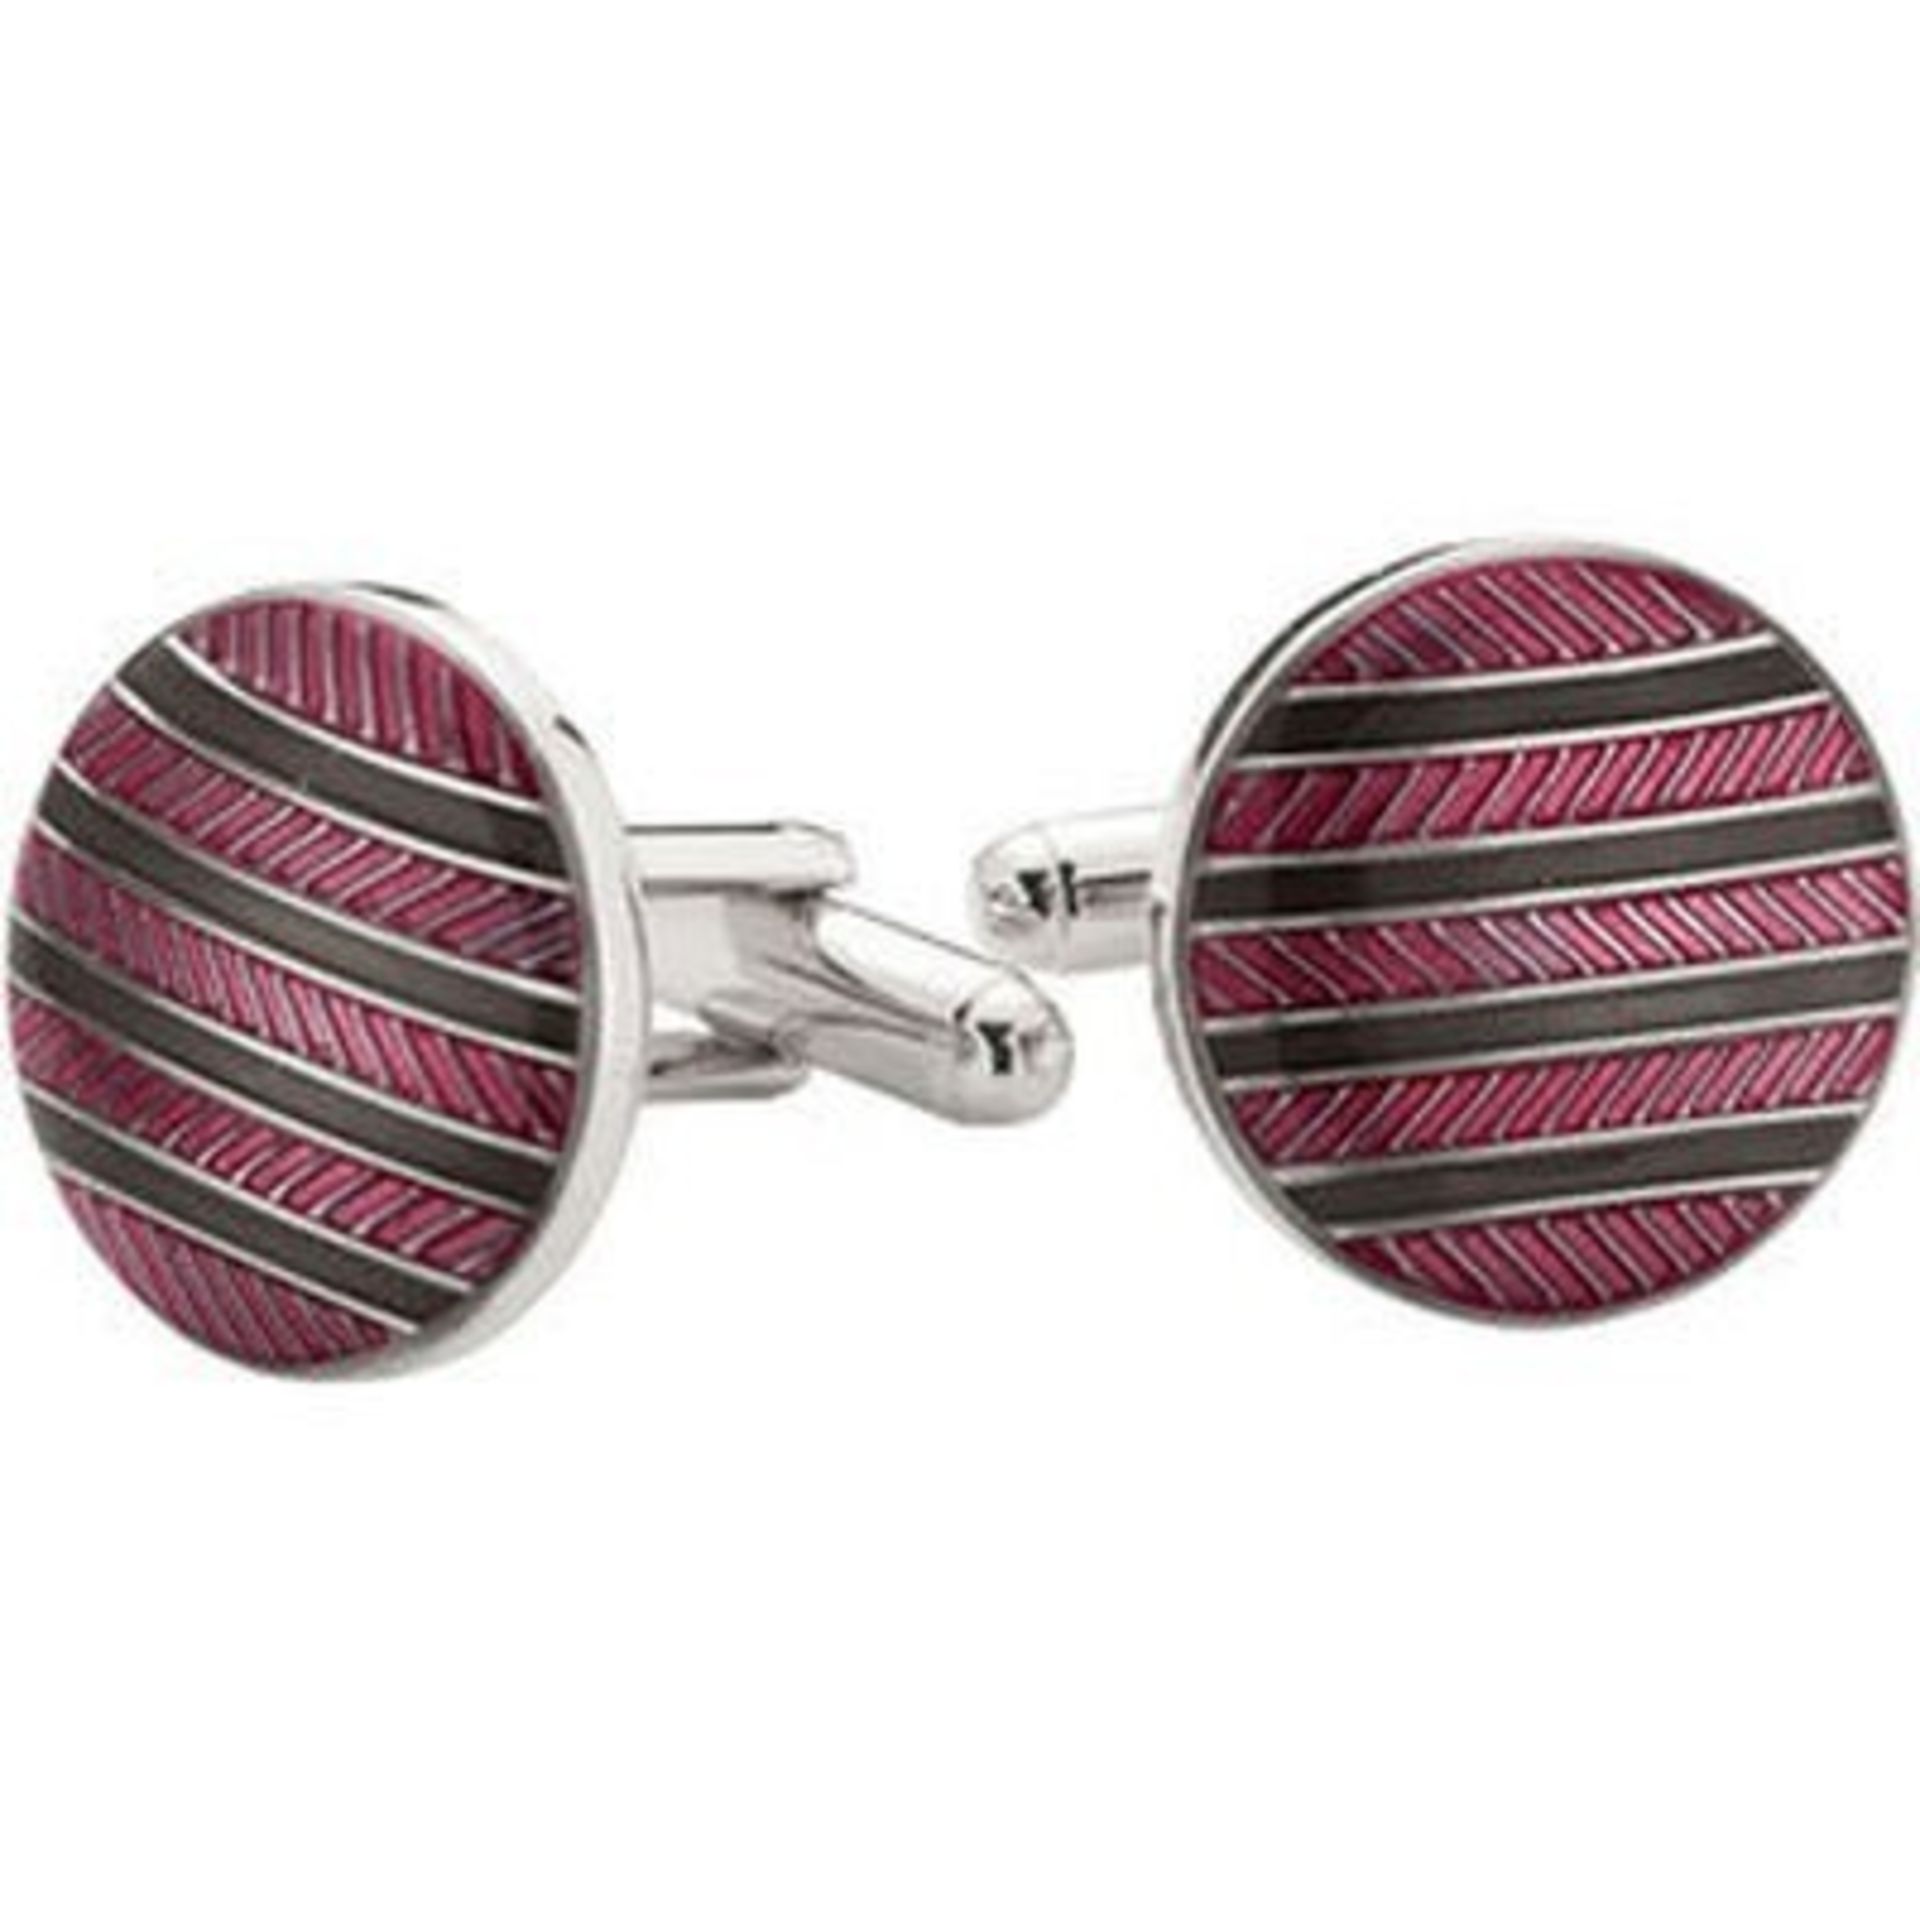 50 x Pairs of Genuine “Circle, Stripe” Enamel CUFFLINKS by Ice London – Silver Plated, 2 Colours